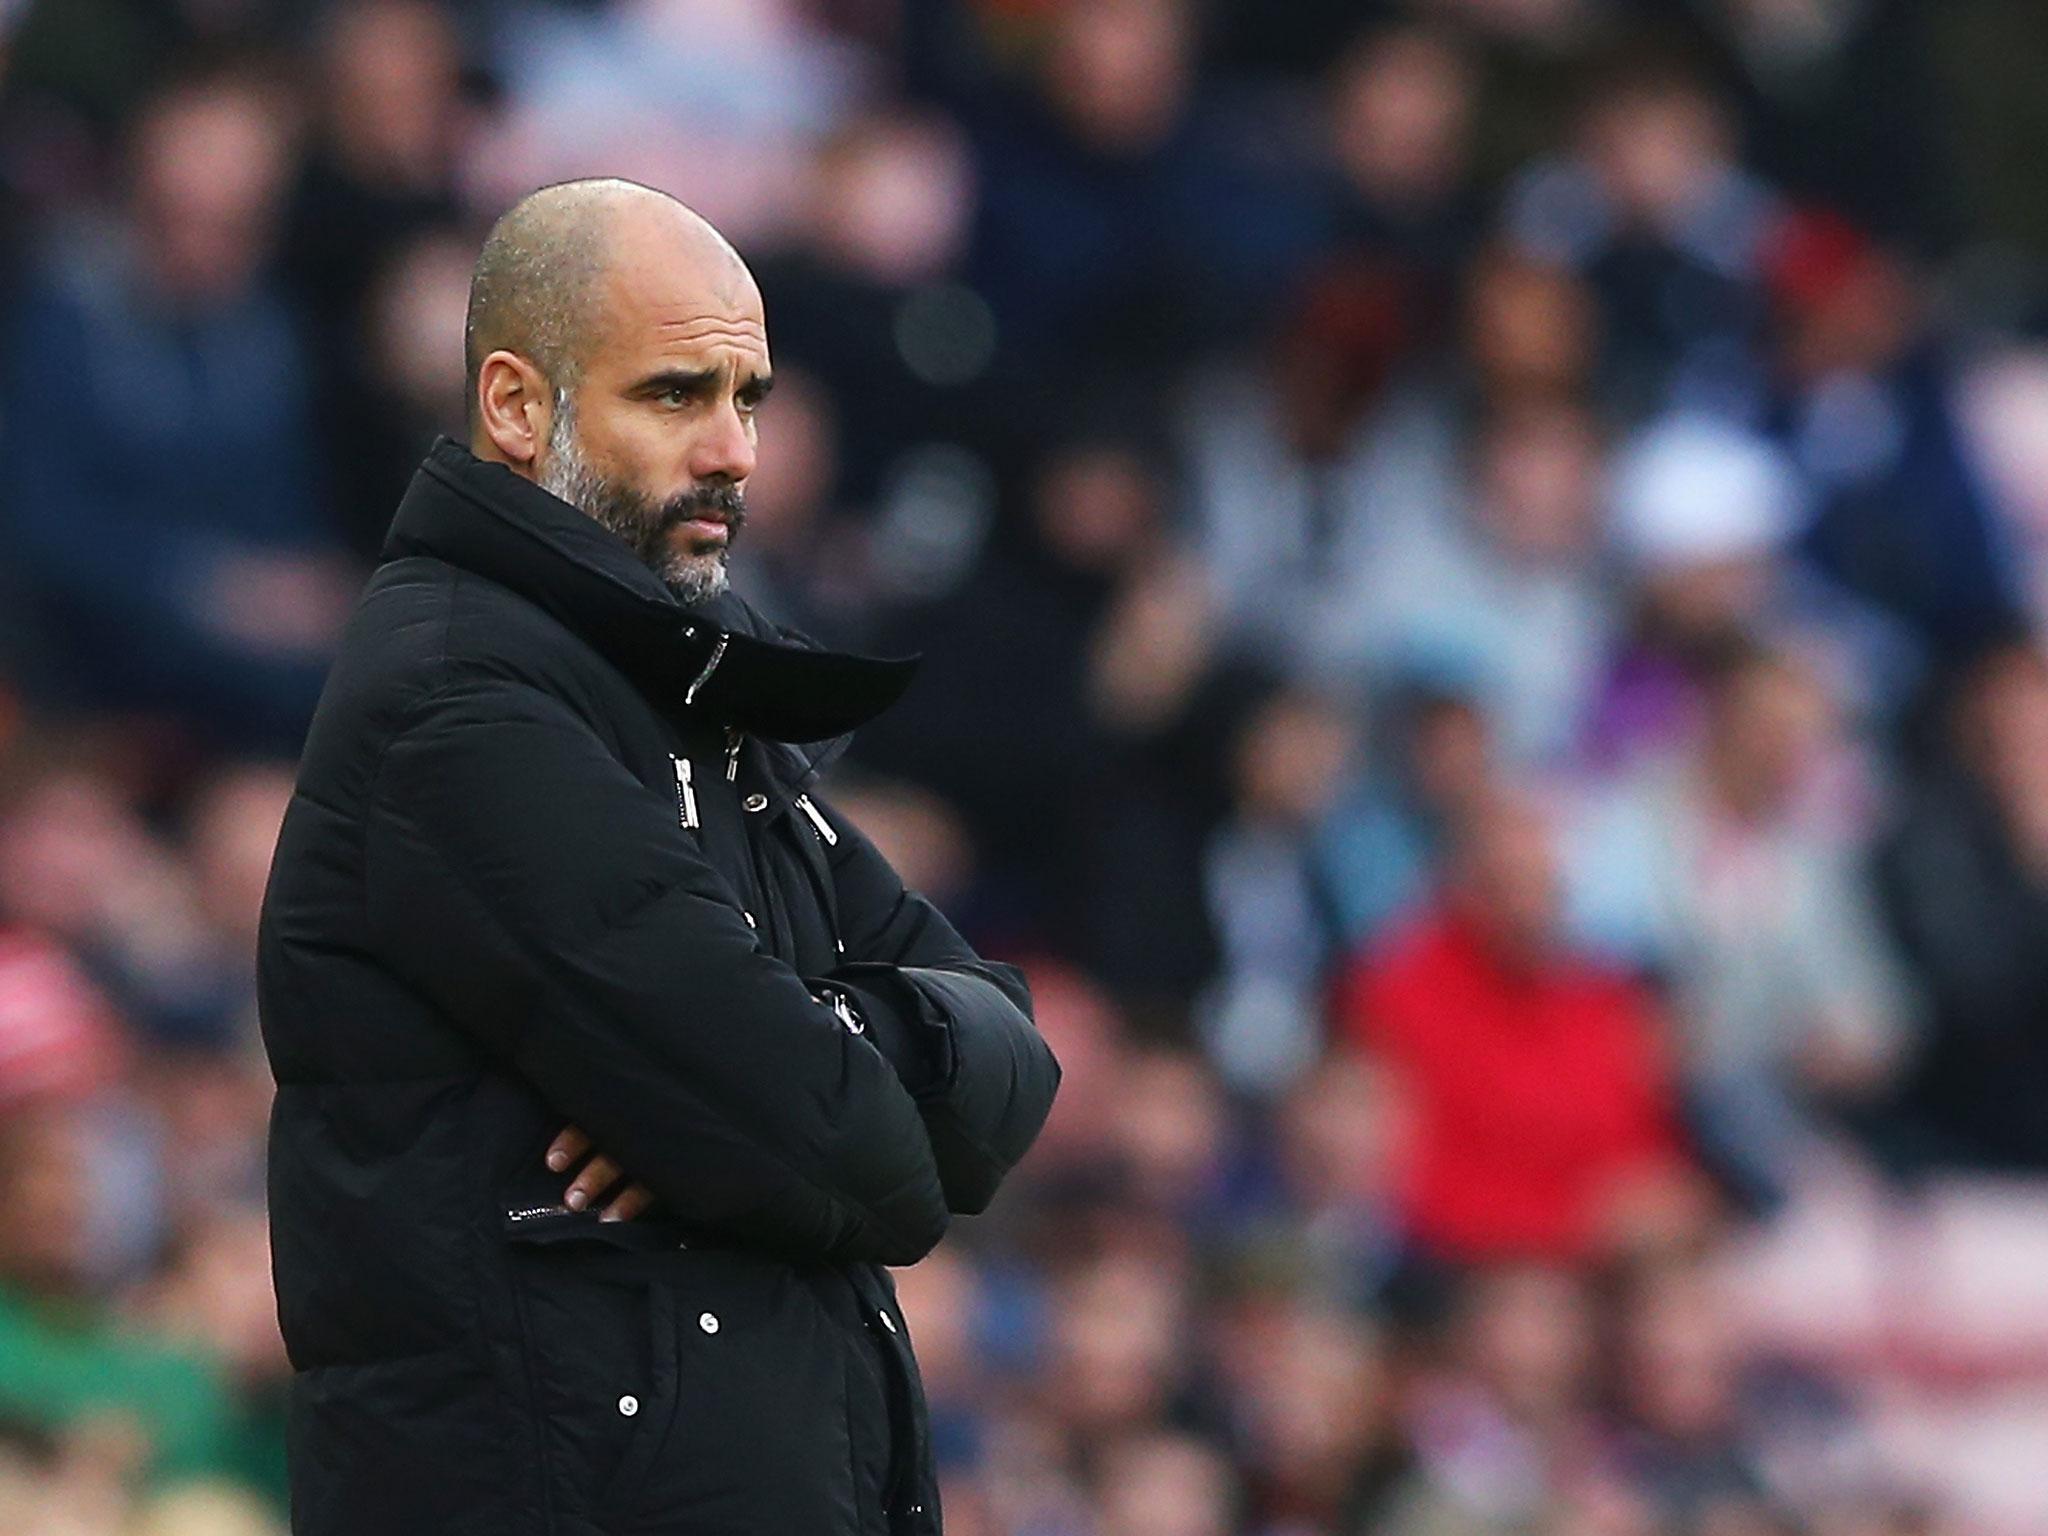 Guardiola has seen his side return to form in recent weeks